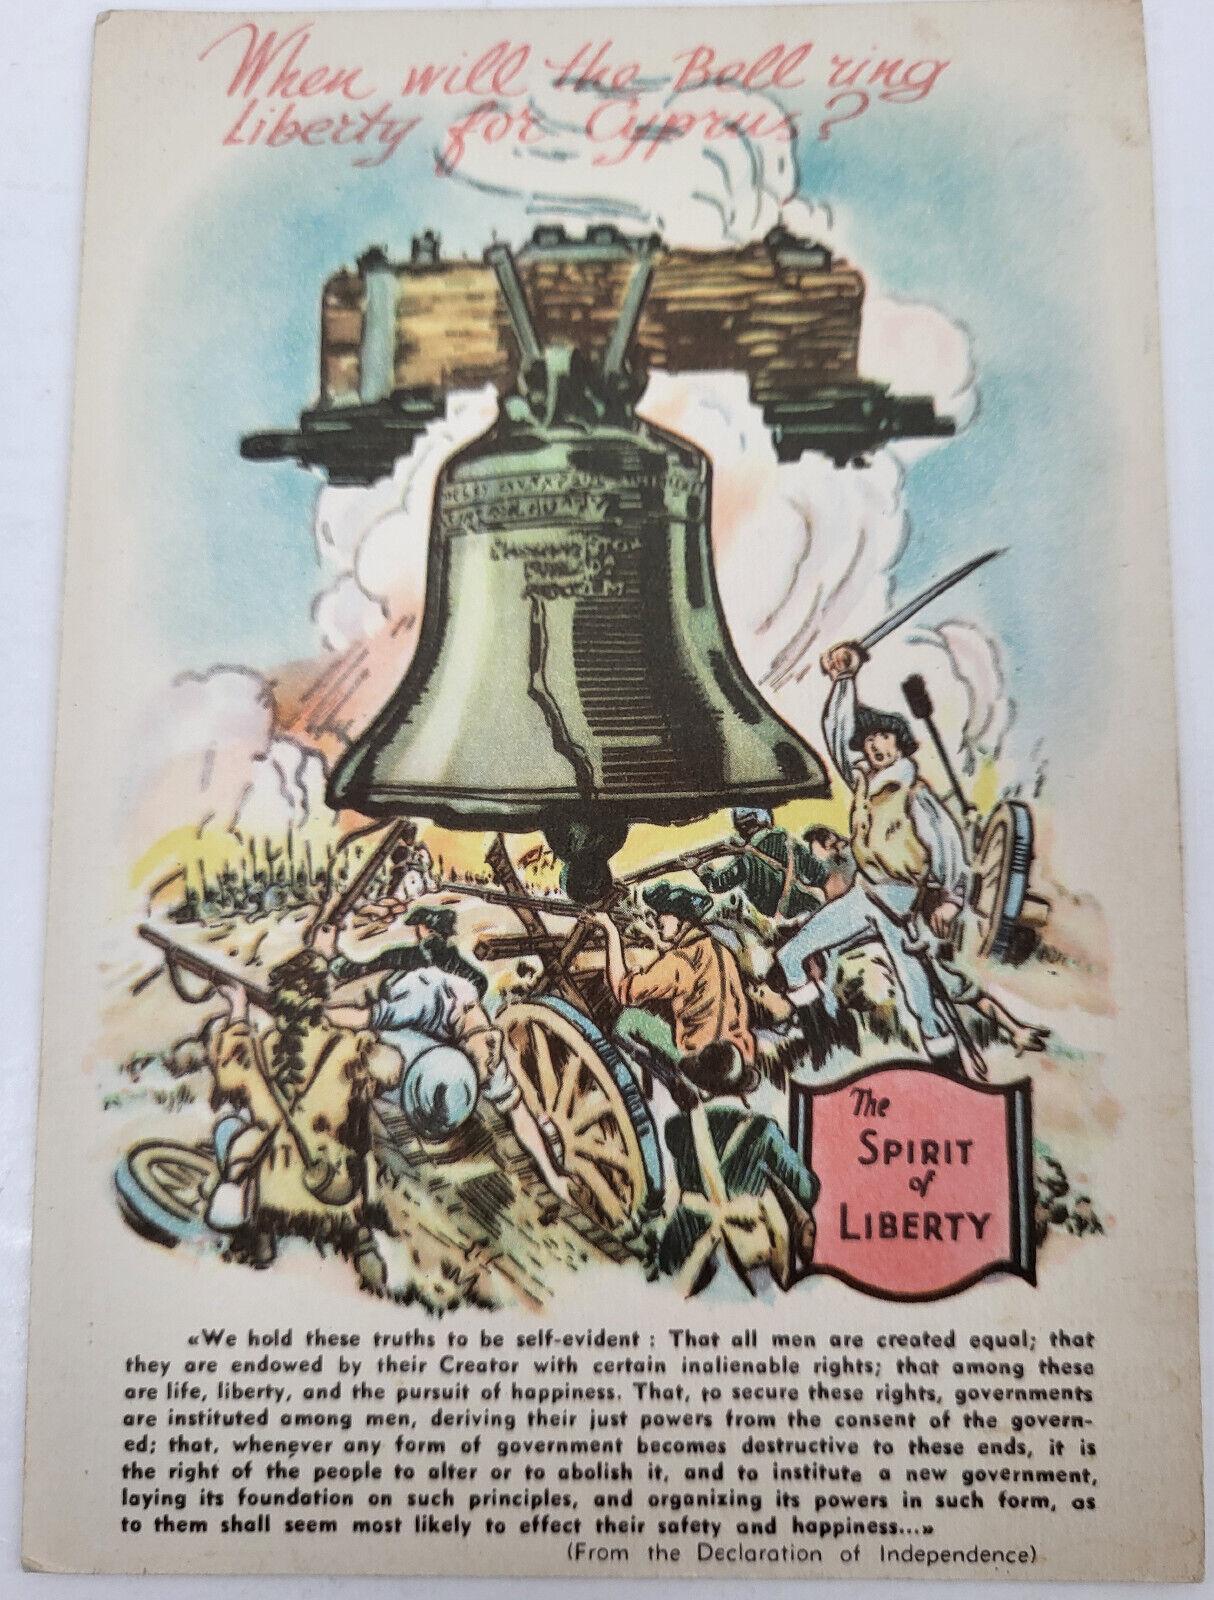 RARE VINTAGE 1956 PC GREEK CYPRIOTS CYPRUS INDEPENDENCE FUNDRAISER LIBERTY BELL